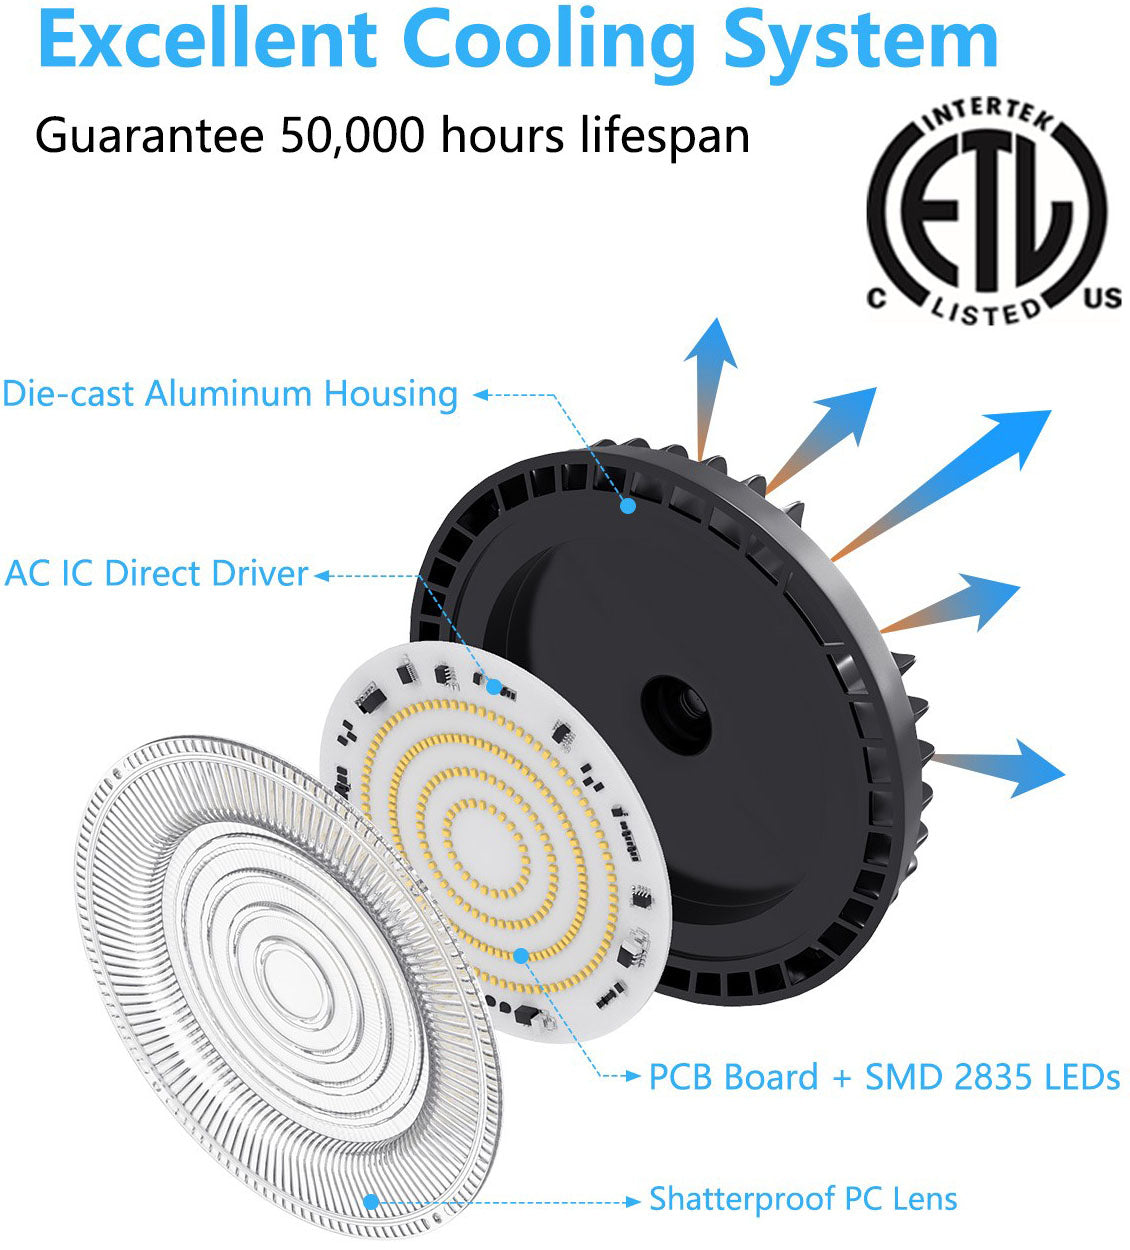 150w UFO LED High Bay Light, Canada 6000k Bright 19500Lm 1m Cable cETL